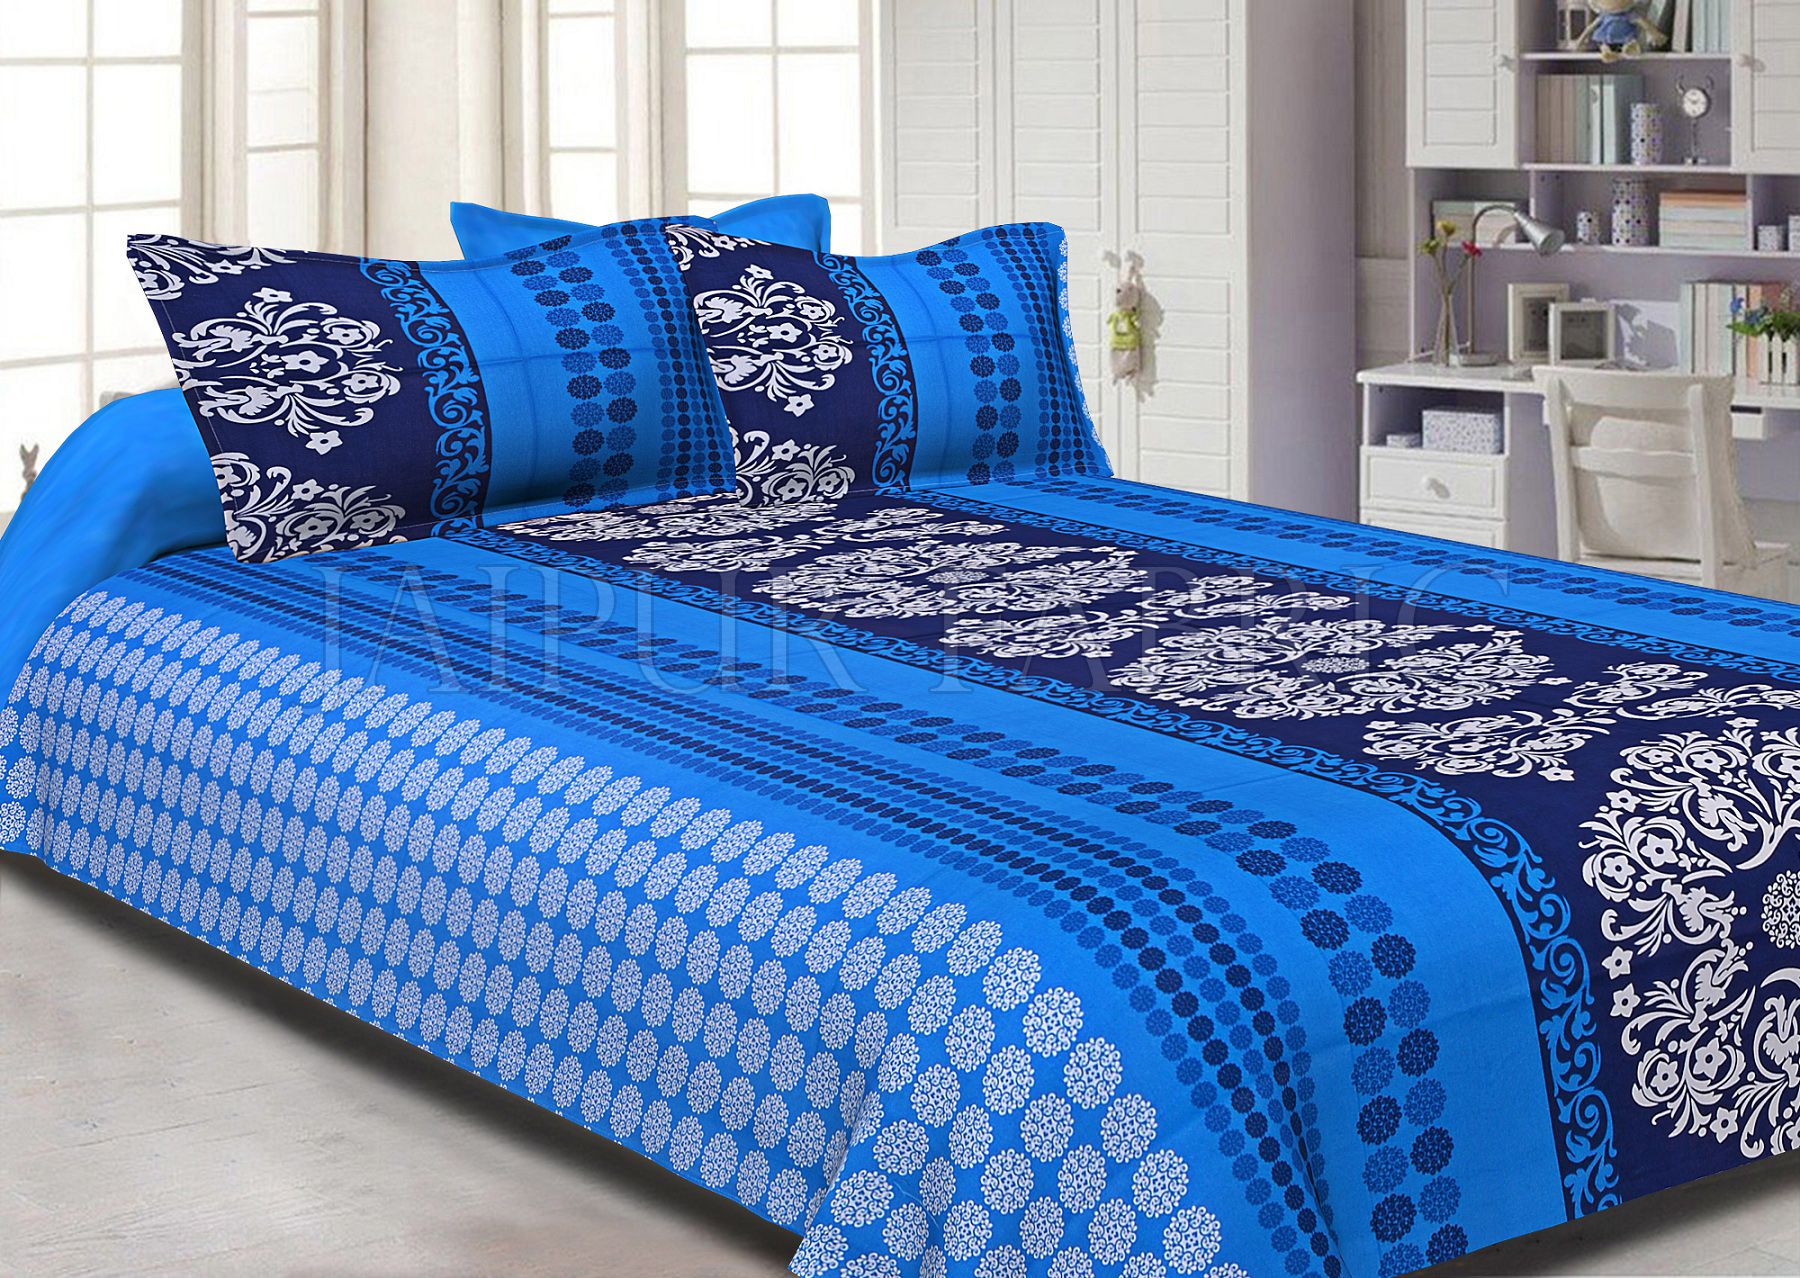 Blue Rajasthani Block Printed Cotton Double Bed Sheet